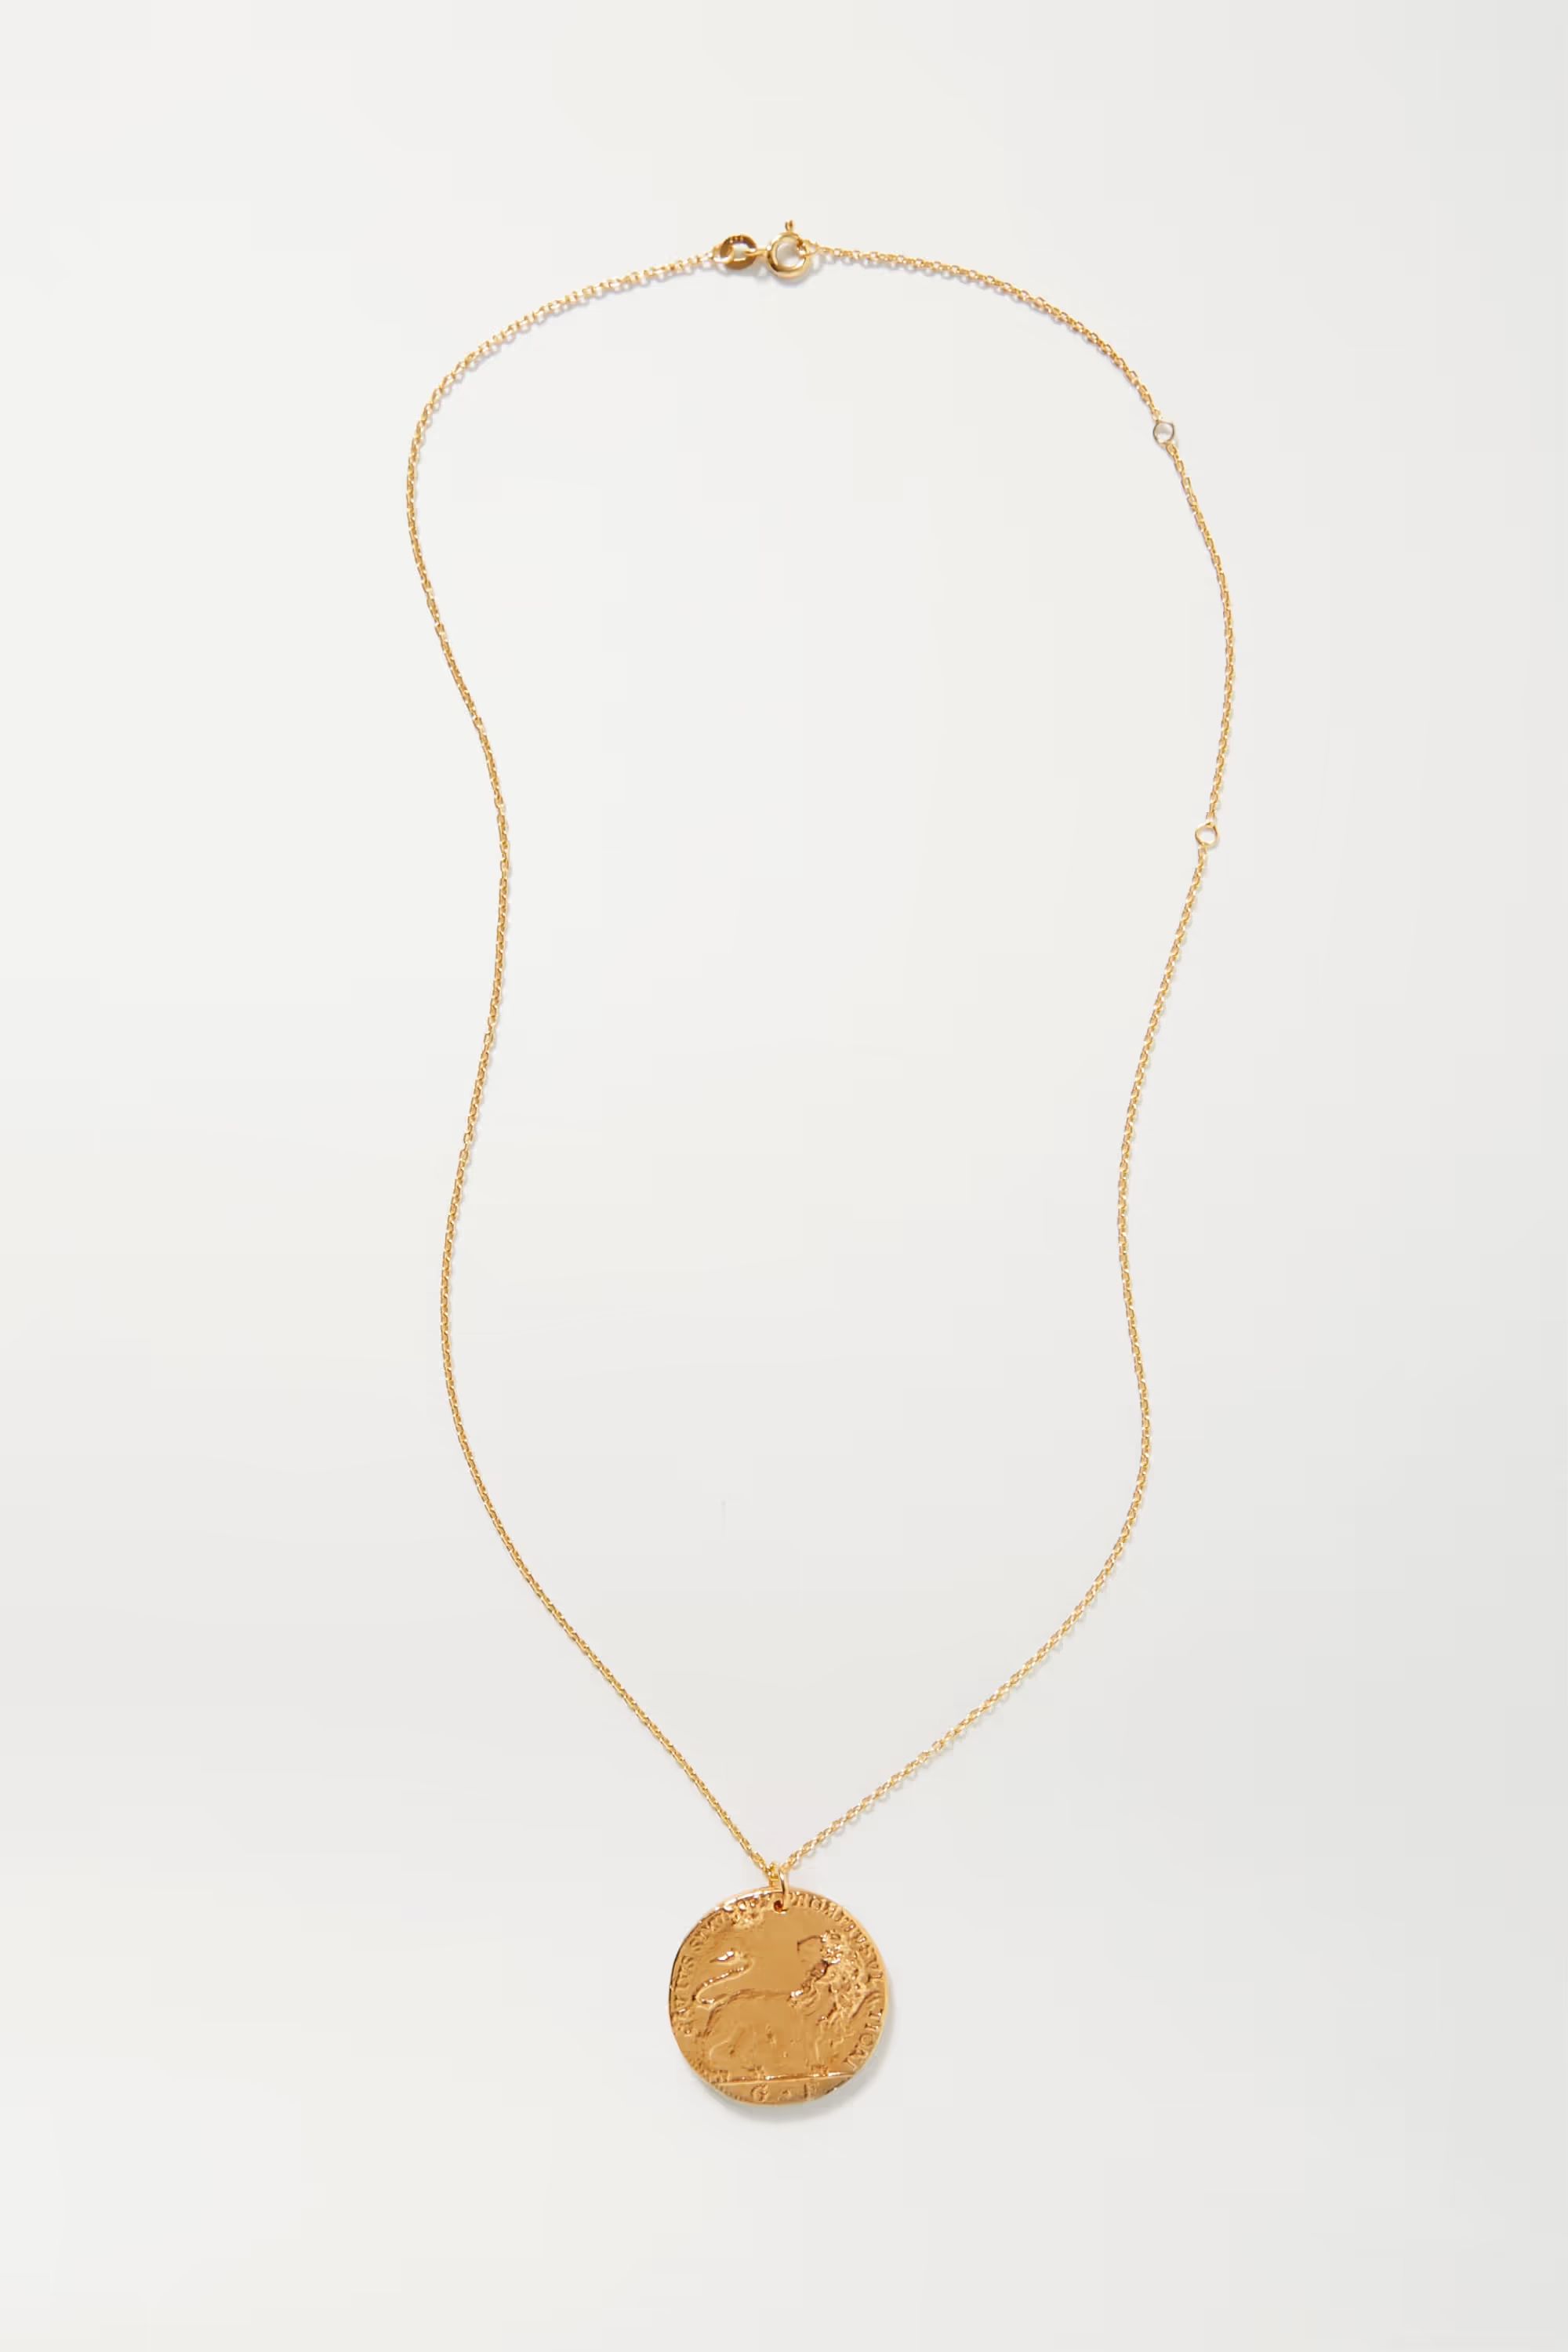 ALIGHIERIIl Leone Medallion gold-plated necklace | NET-A-PORTER (US)